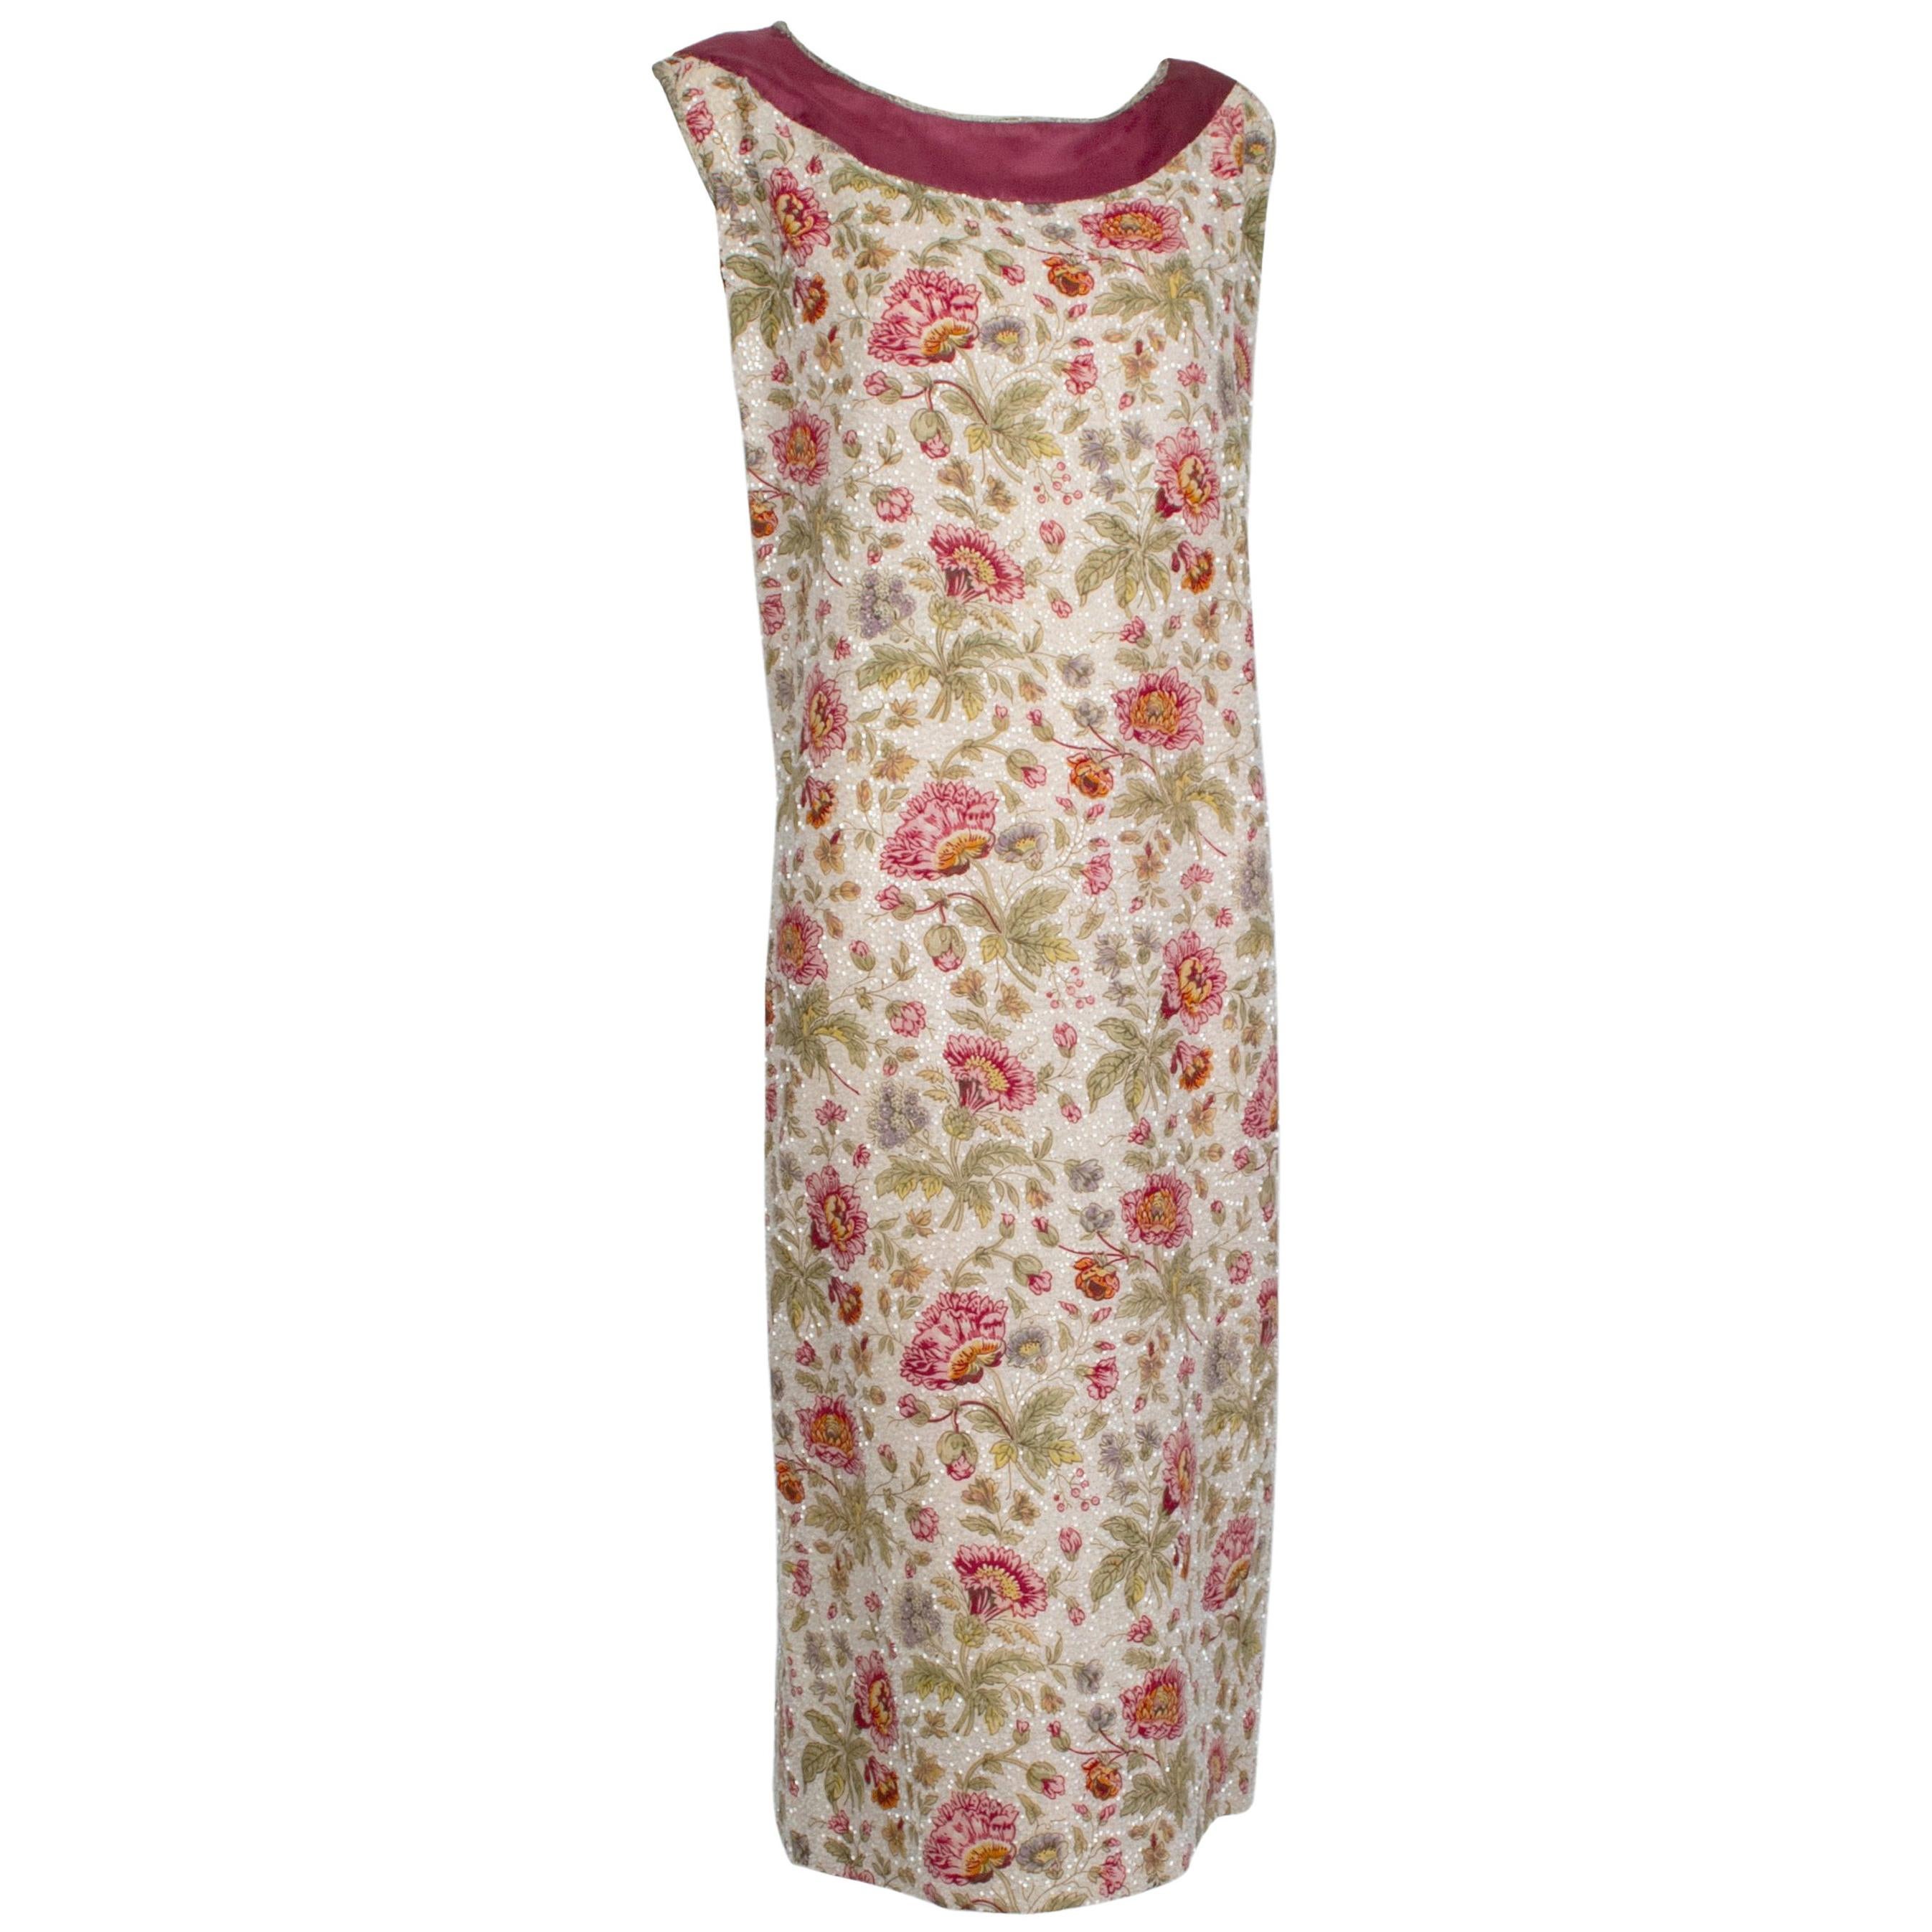 Sleeveless Plum Floral Glass Bead Sack Dress with Gold Piping - M, 1920s For Sale